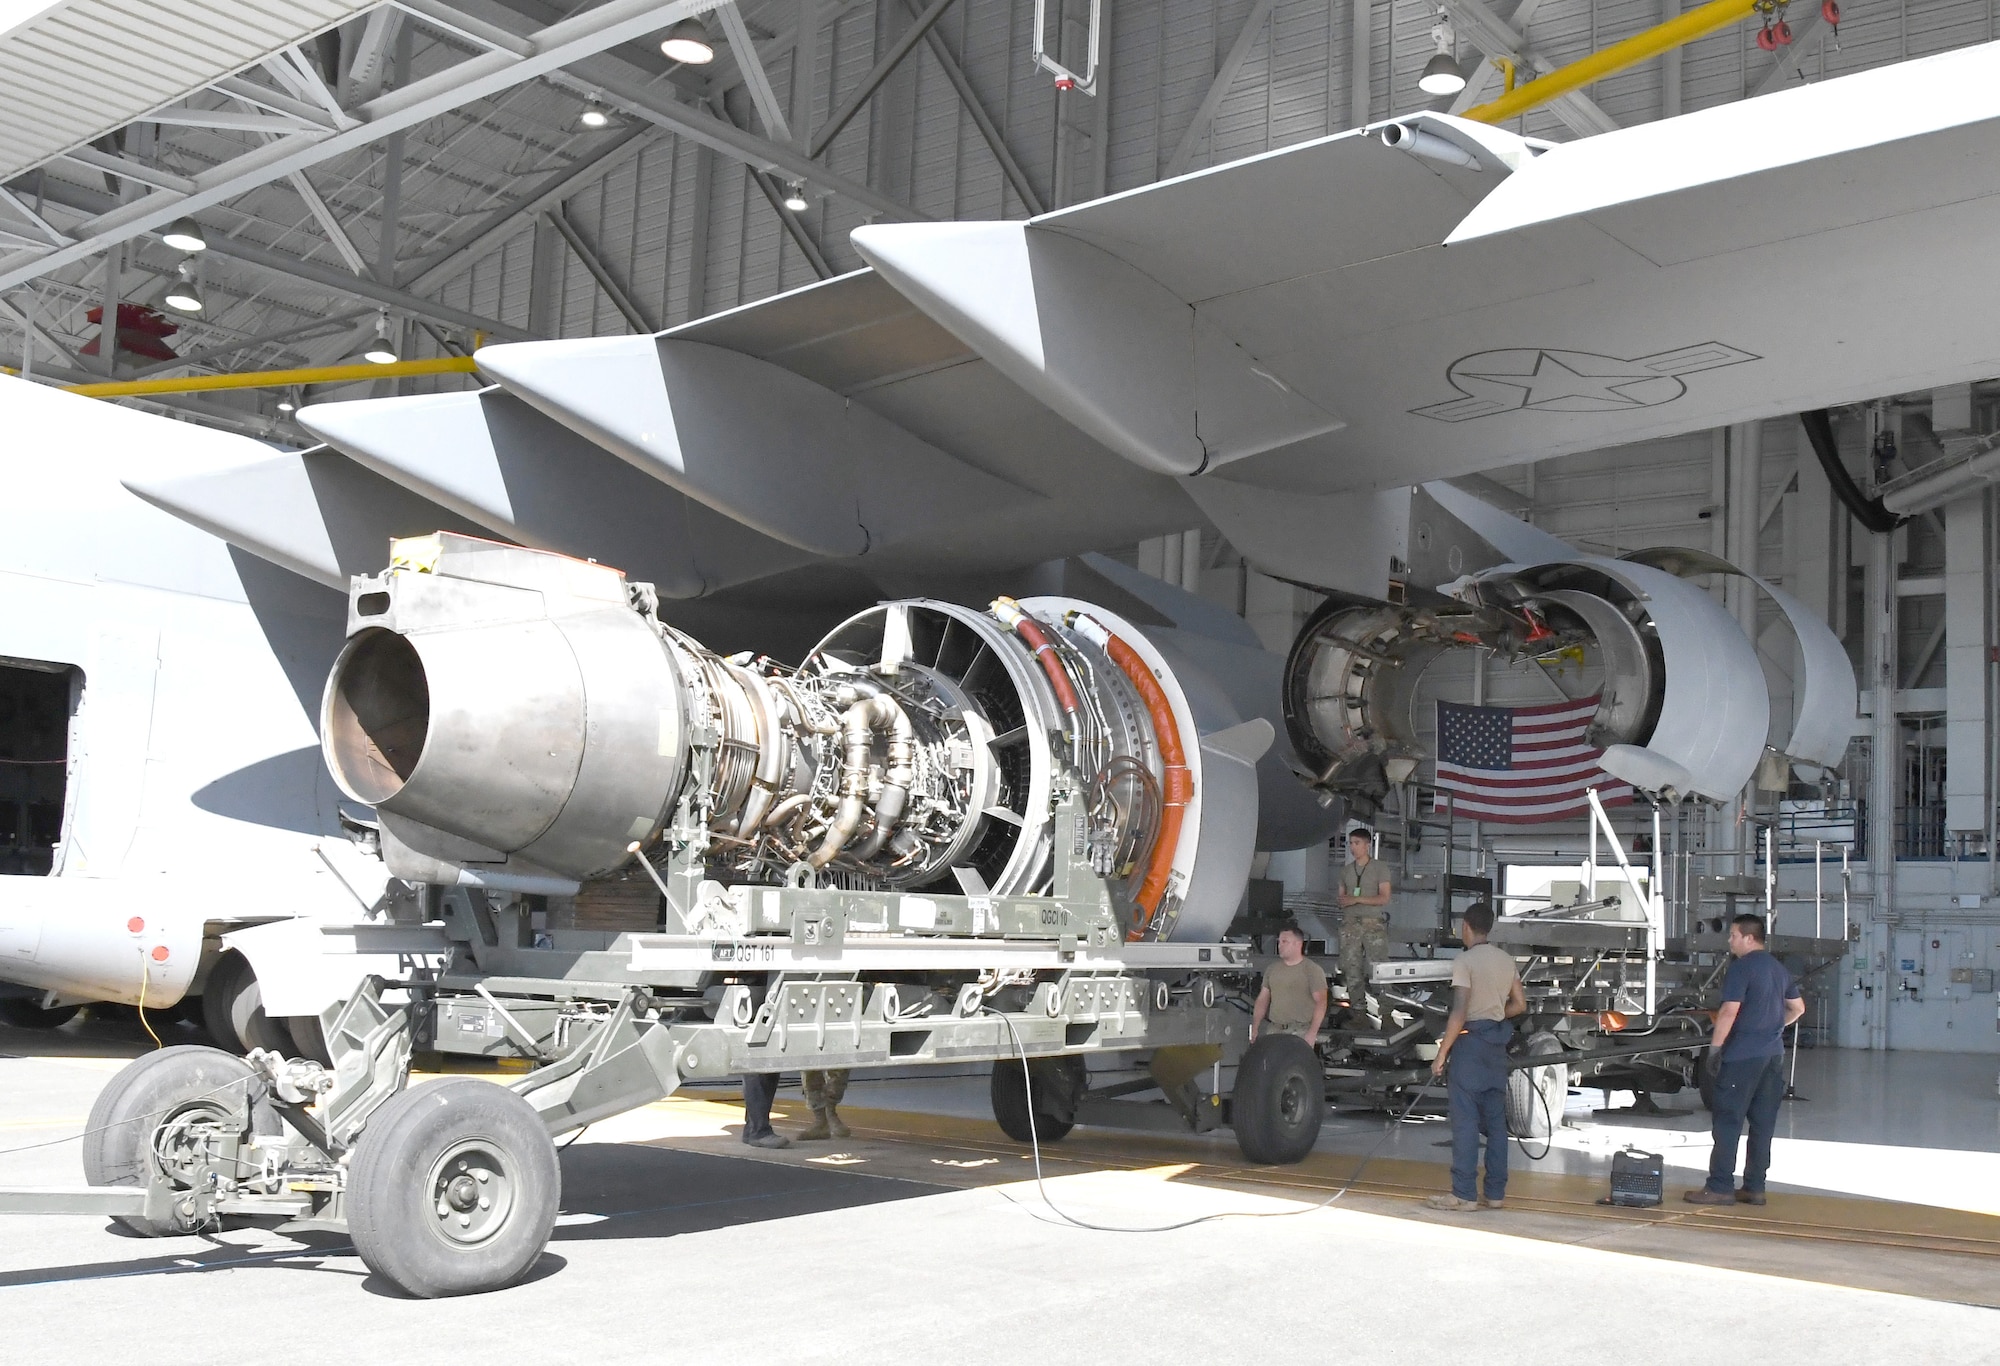 U.S. Air Force Airmen assigned to the 735th Air Mobility Squadron and the 15th Maintenance Group prepare a C-17 Globemaster III engine for installation at Joint Base Pearl Harbor-Hickam, Hawaii on Aug. 19, 2022. (U.S. Air Force photo by Amelia Dickson)